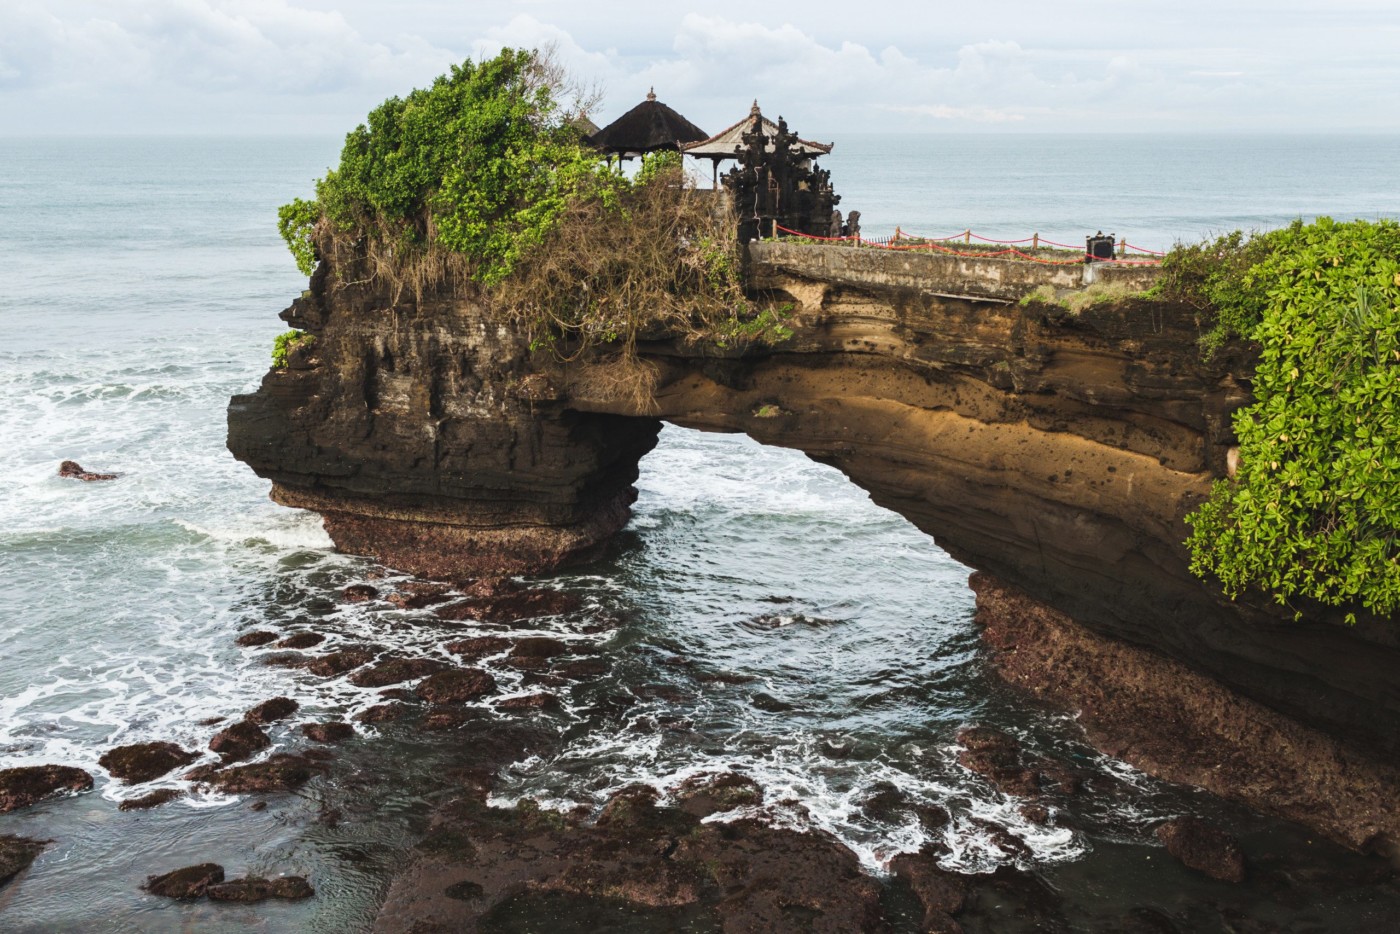 Sacred Balinese temple Tanah Lot. Pura Batu Bolong on the edge of a cliff at coastline with hole in the rock. Traditional style and architecture of Bali. Holy place for local indonesian people